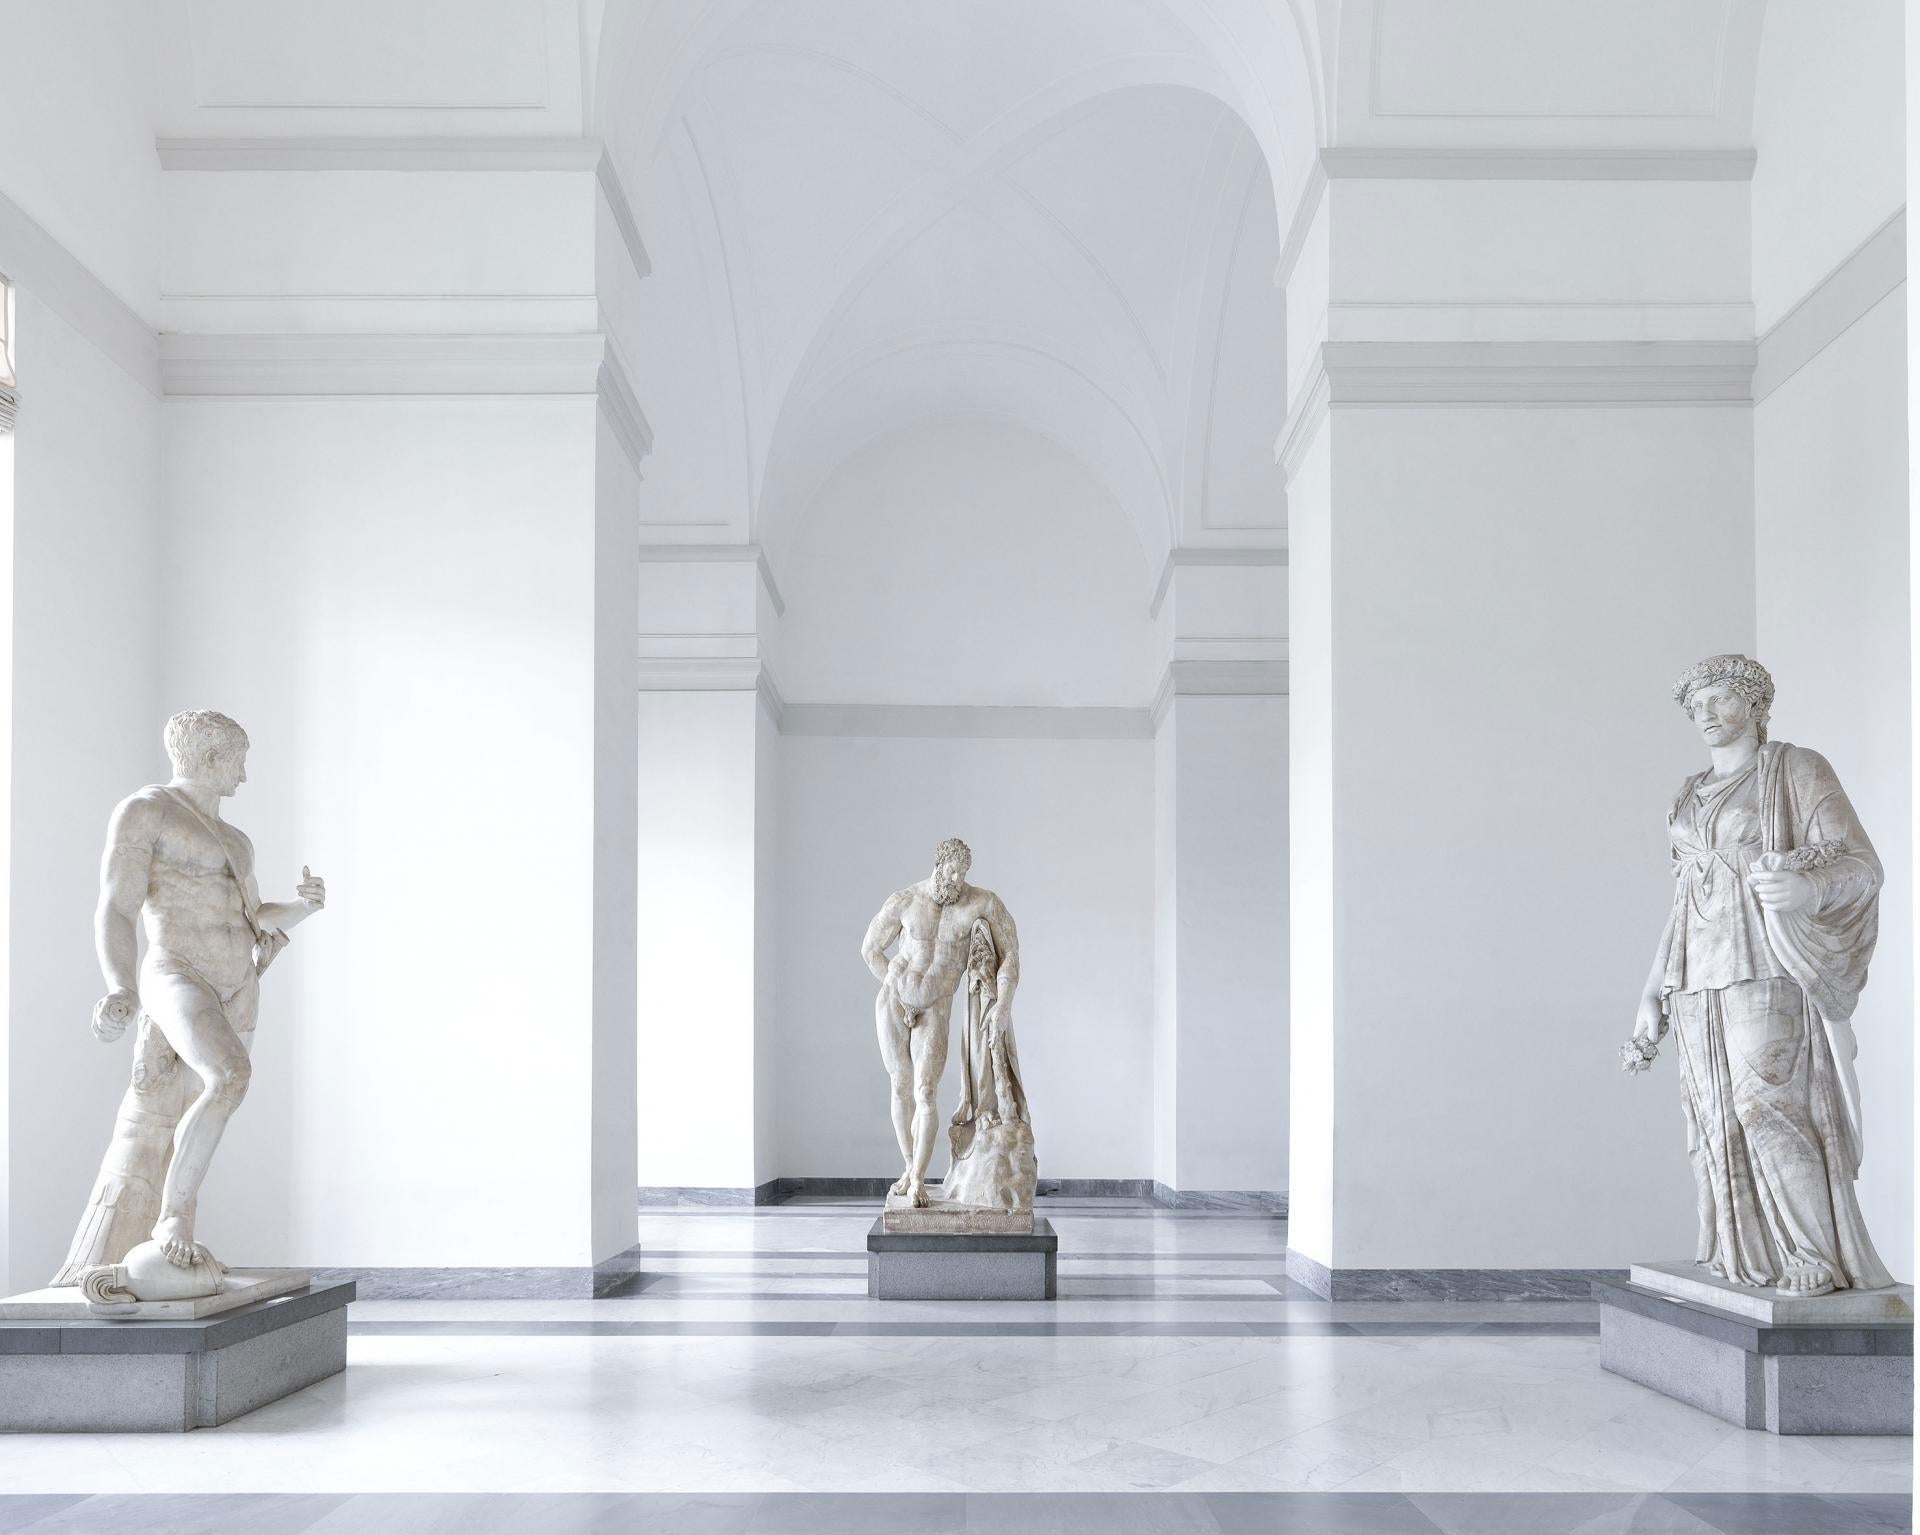 Massimo Listri
Museo Archeologico II, Napoli, 2018
C print
Signed and numbered edition of 5

39.5 x 47 inches Edition of 5  
47.5 × 59 inches Edition of 5  
71 x 88.75 inches Edition of 5

Florentine photographer Massimo Listri is fascinated how his